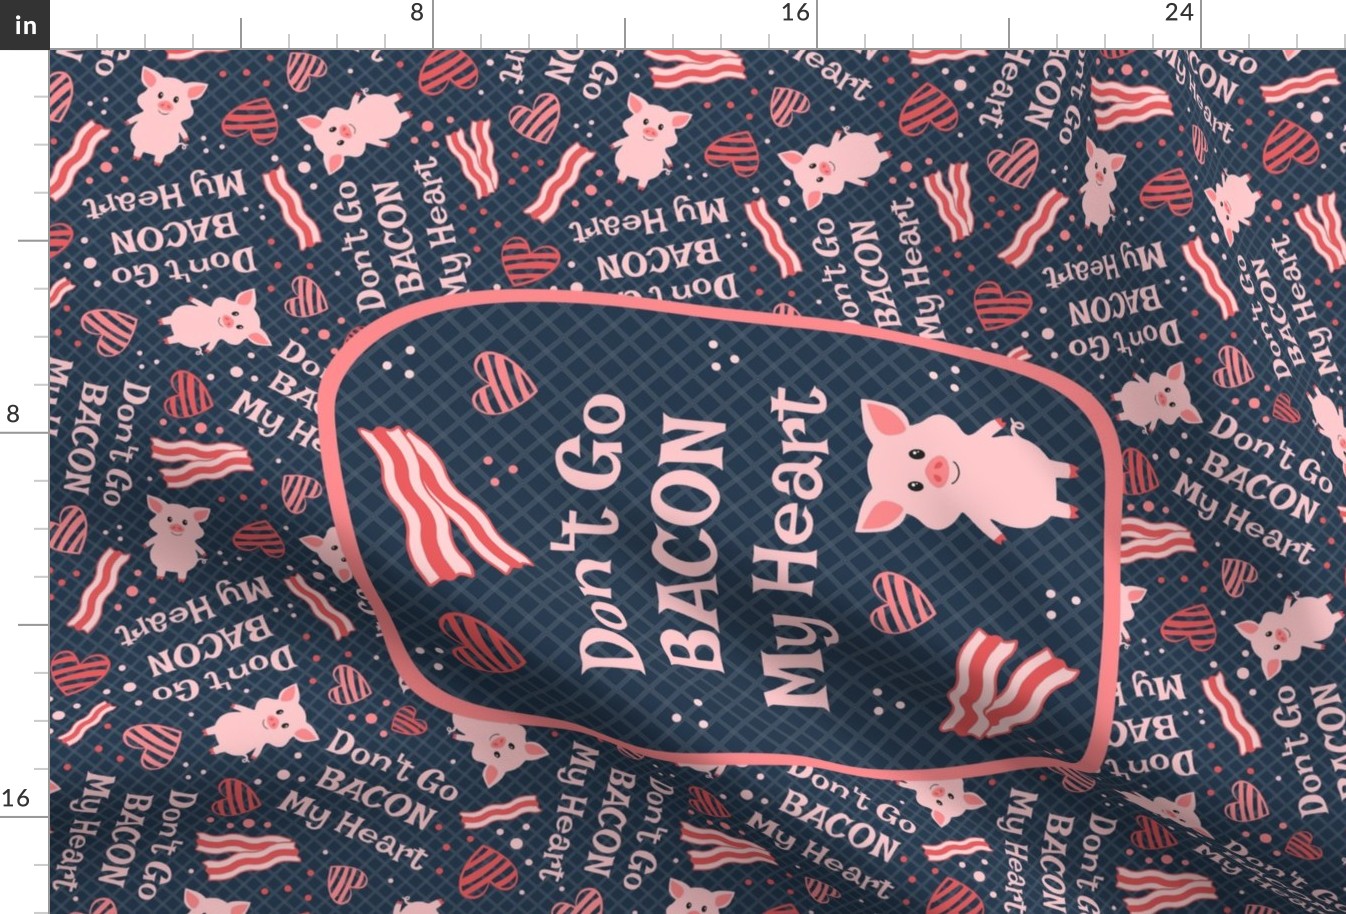 Large 27x18 Fat Quarter Panel Don't Go Bacon My Heart Funny Valentine Pigs for Wall Hanging or Tea Towel